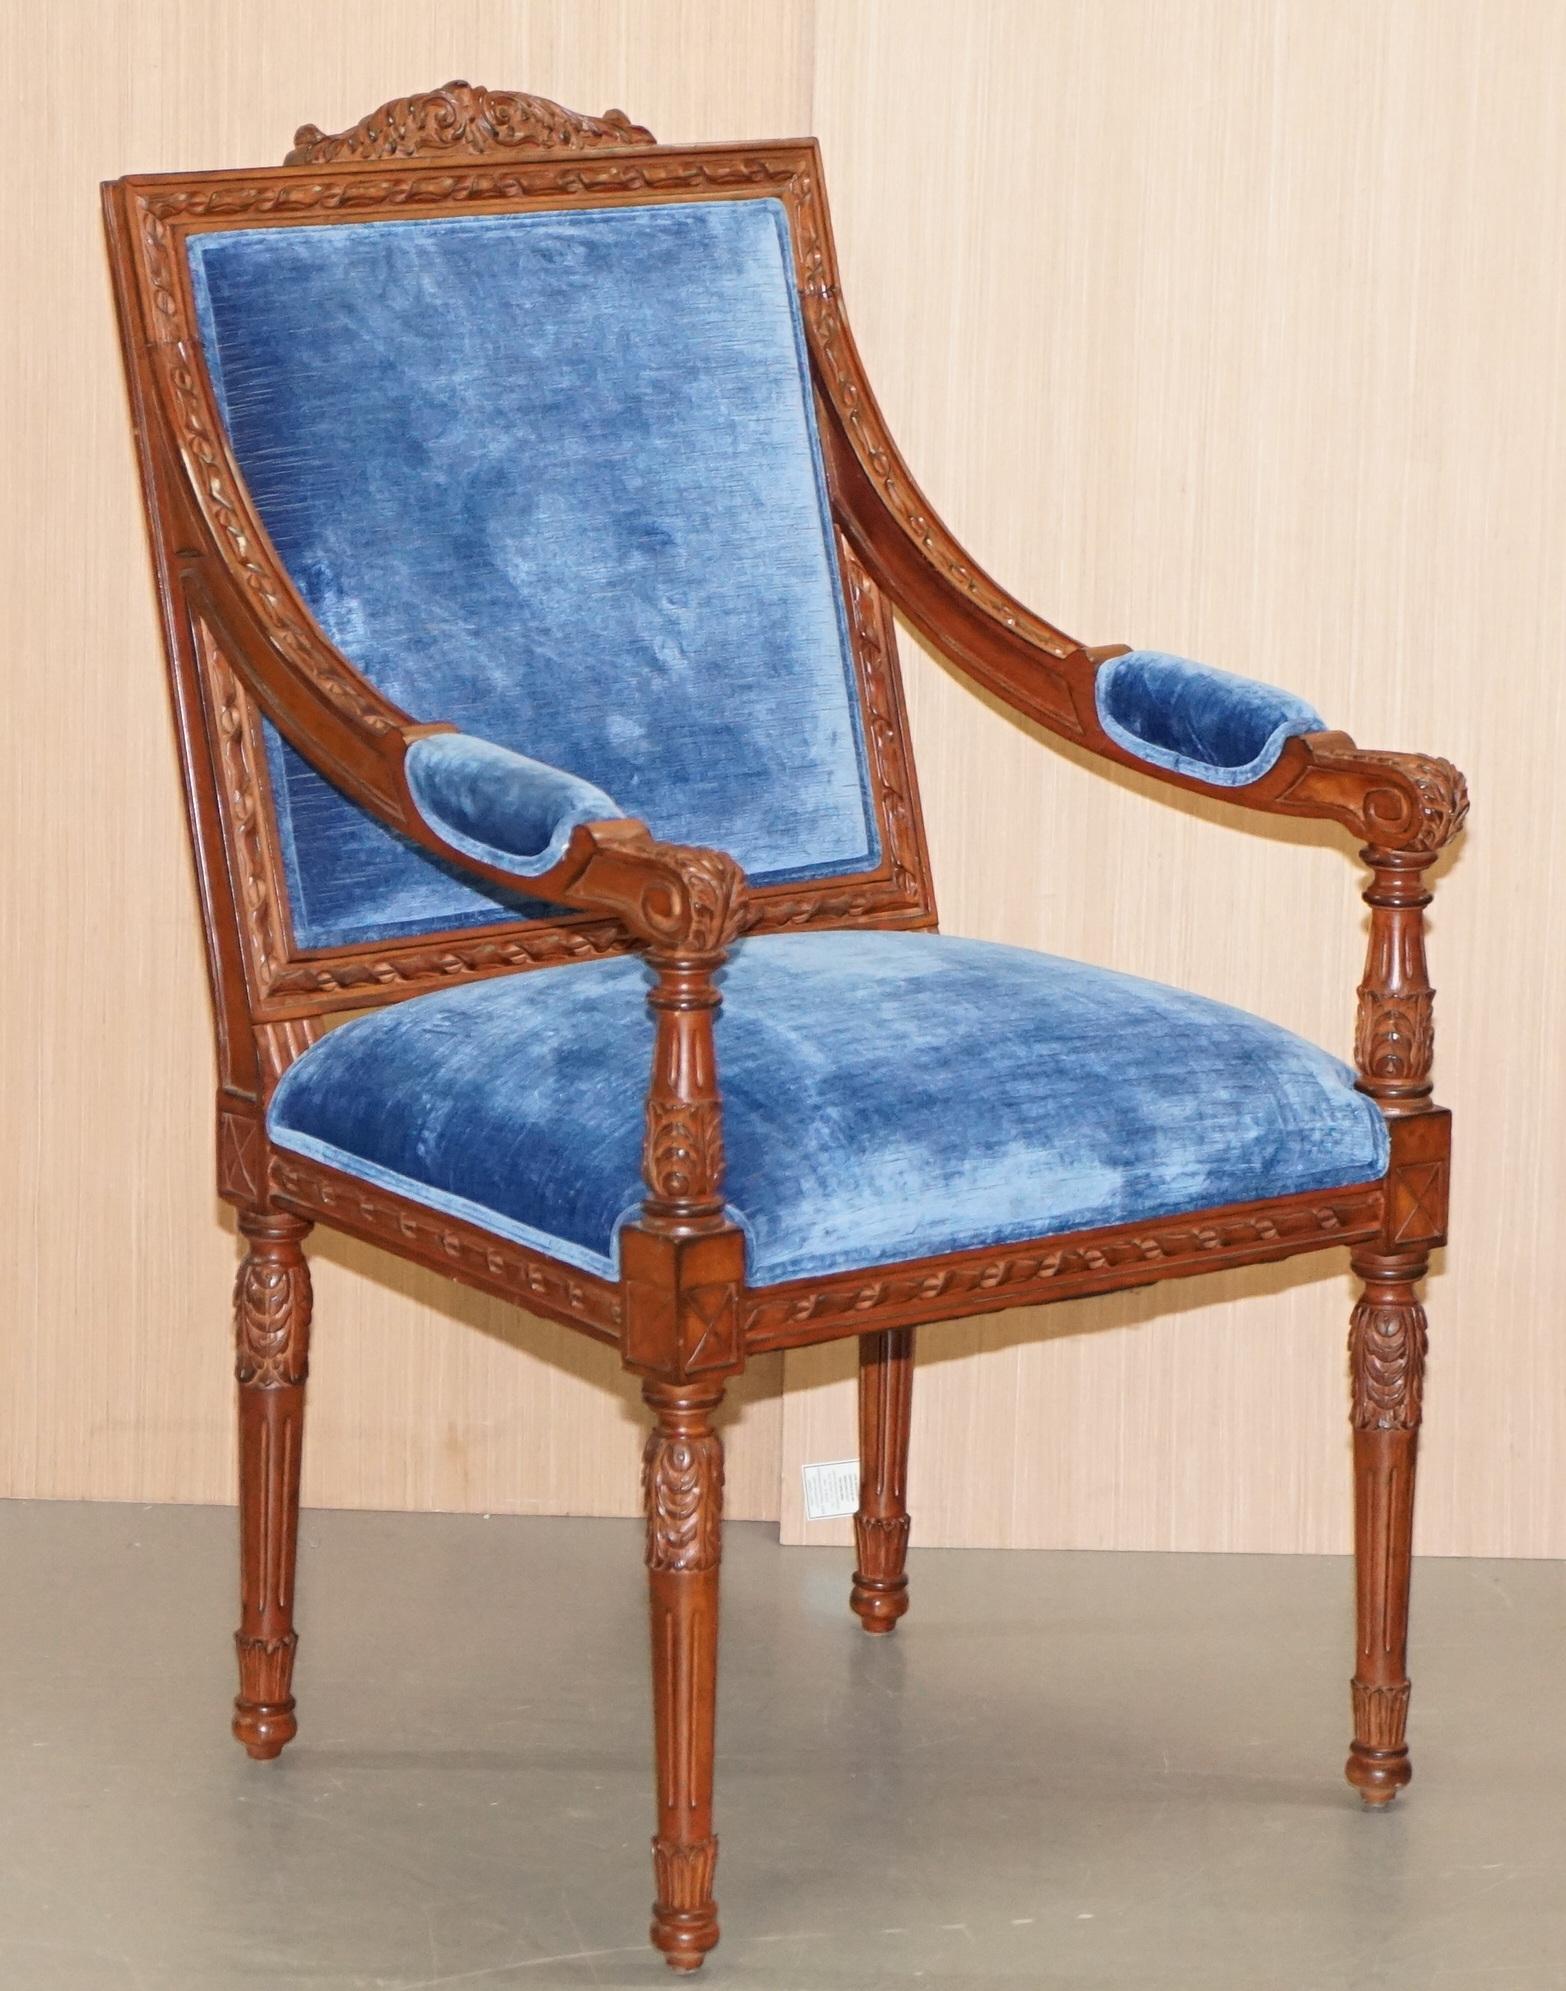 We are delighted to offer for sale this stunning pair George III style hand carved mahogany open armchairs with Royal blue velvet upholstery 

A very good looking and well made pair, the timber is ornately carved all over, there is exquisite